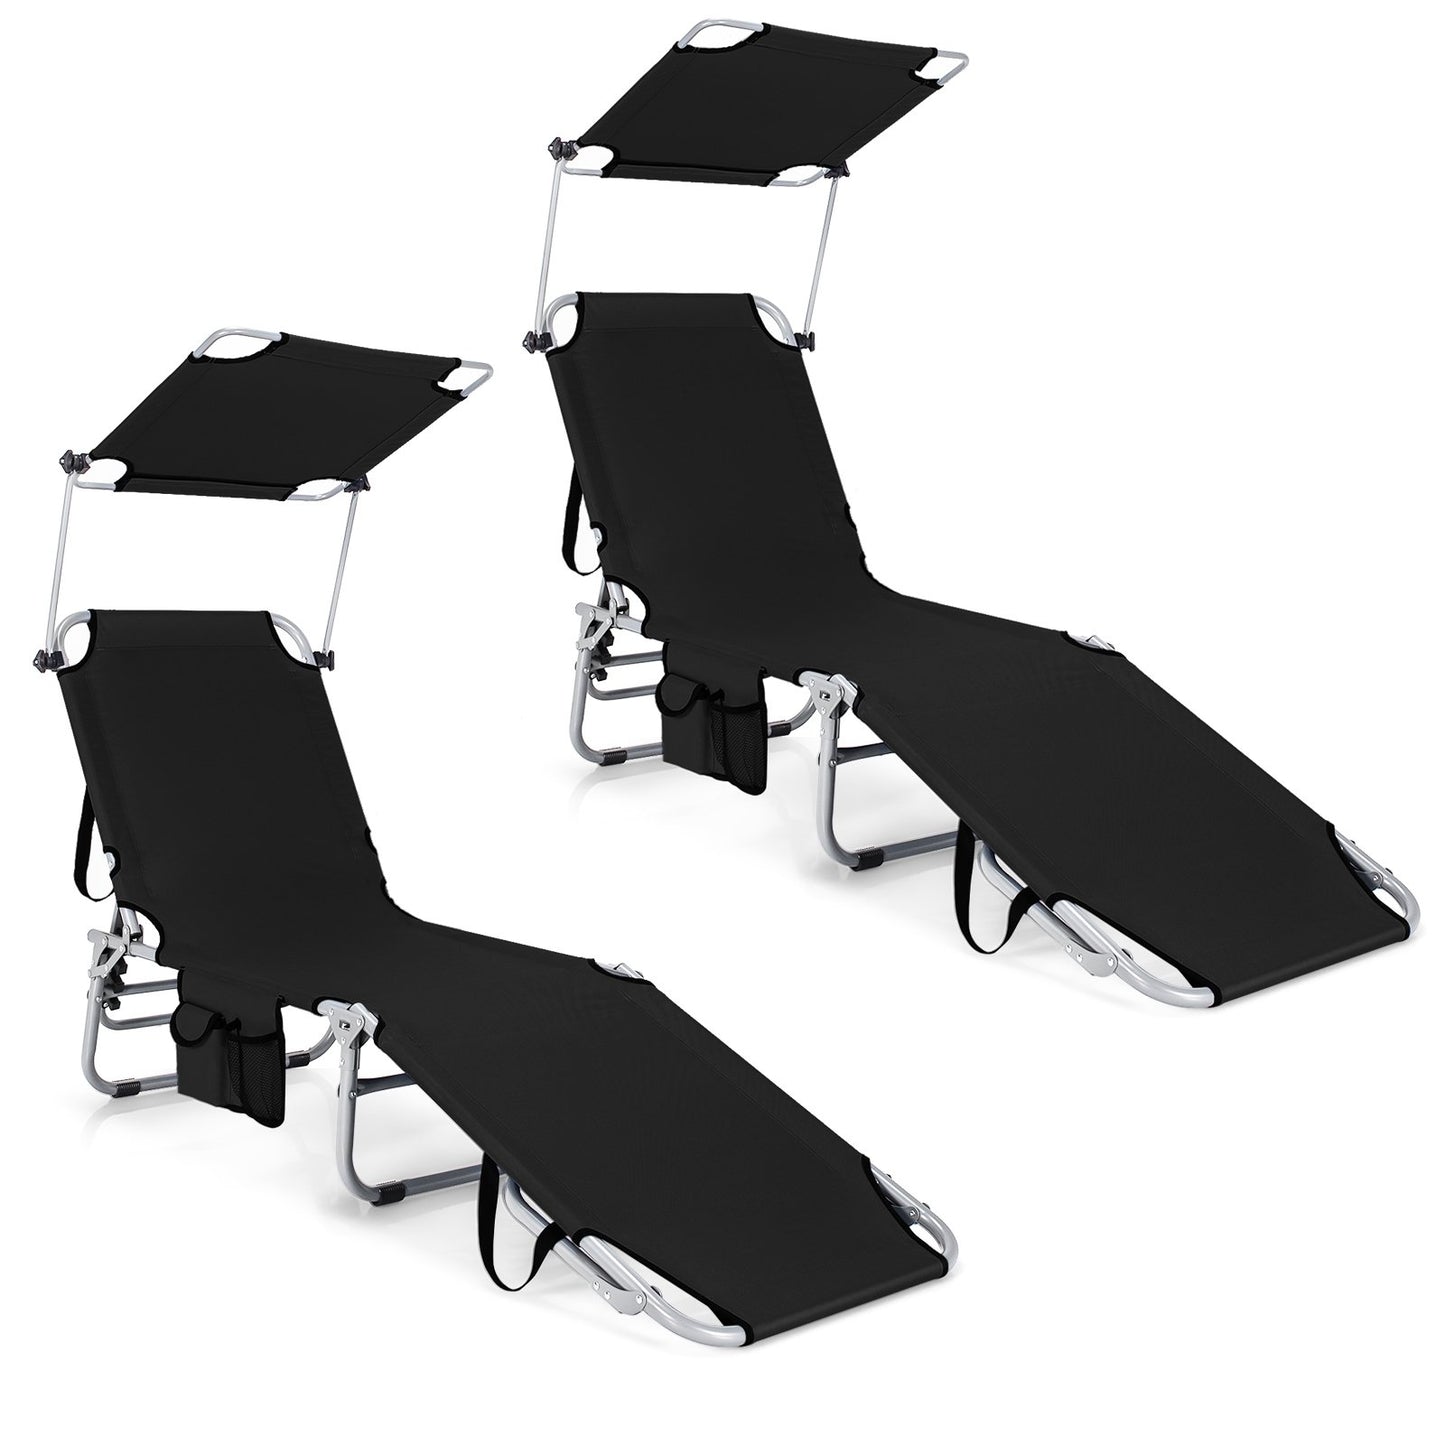 Set of 2 Portable Reclining Chair with 5 Adjustable Positions, Black